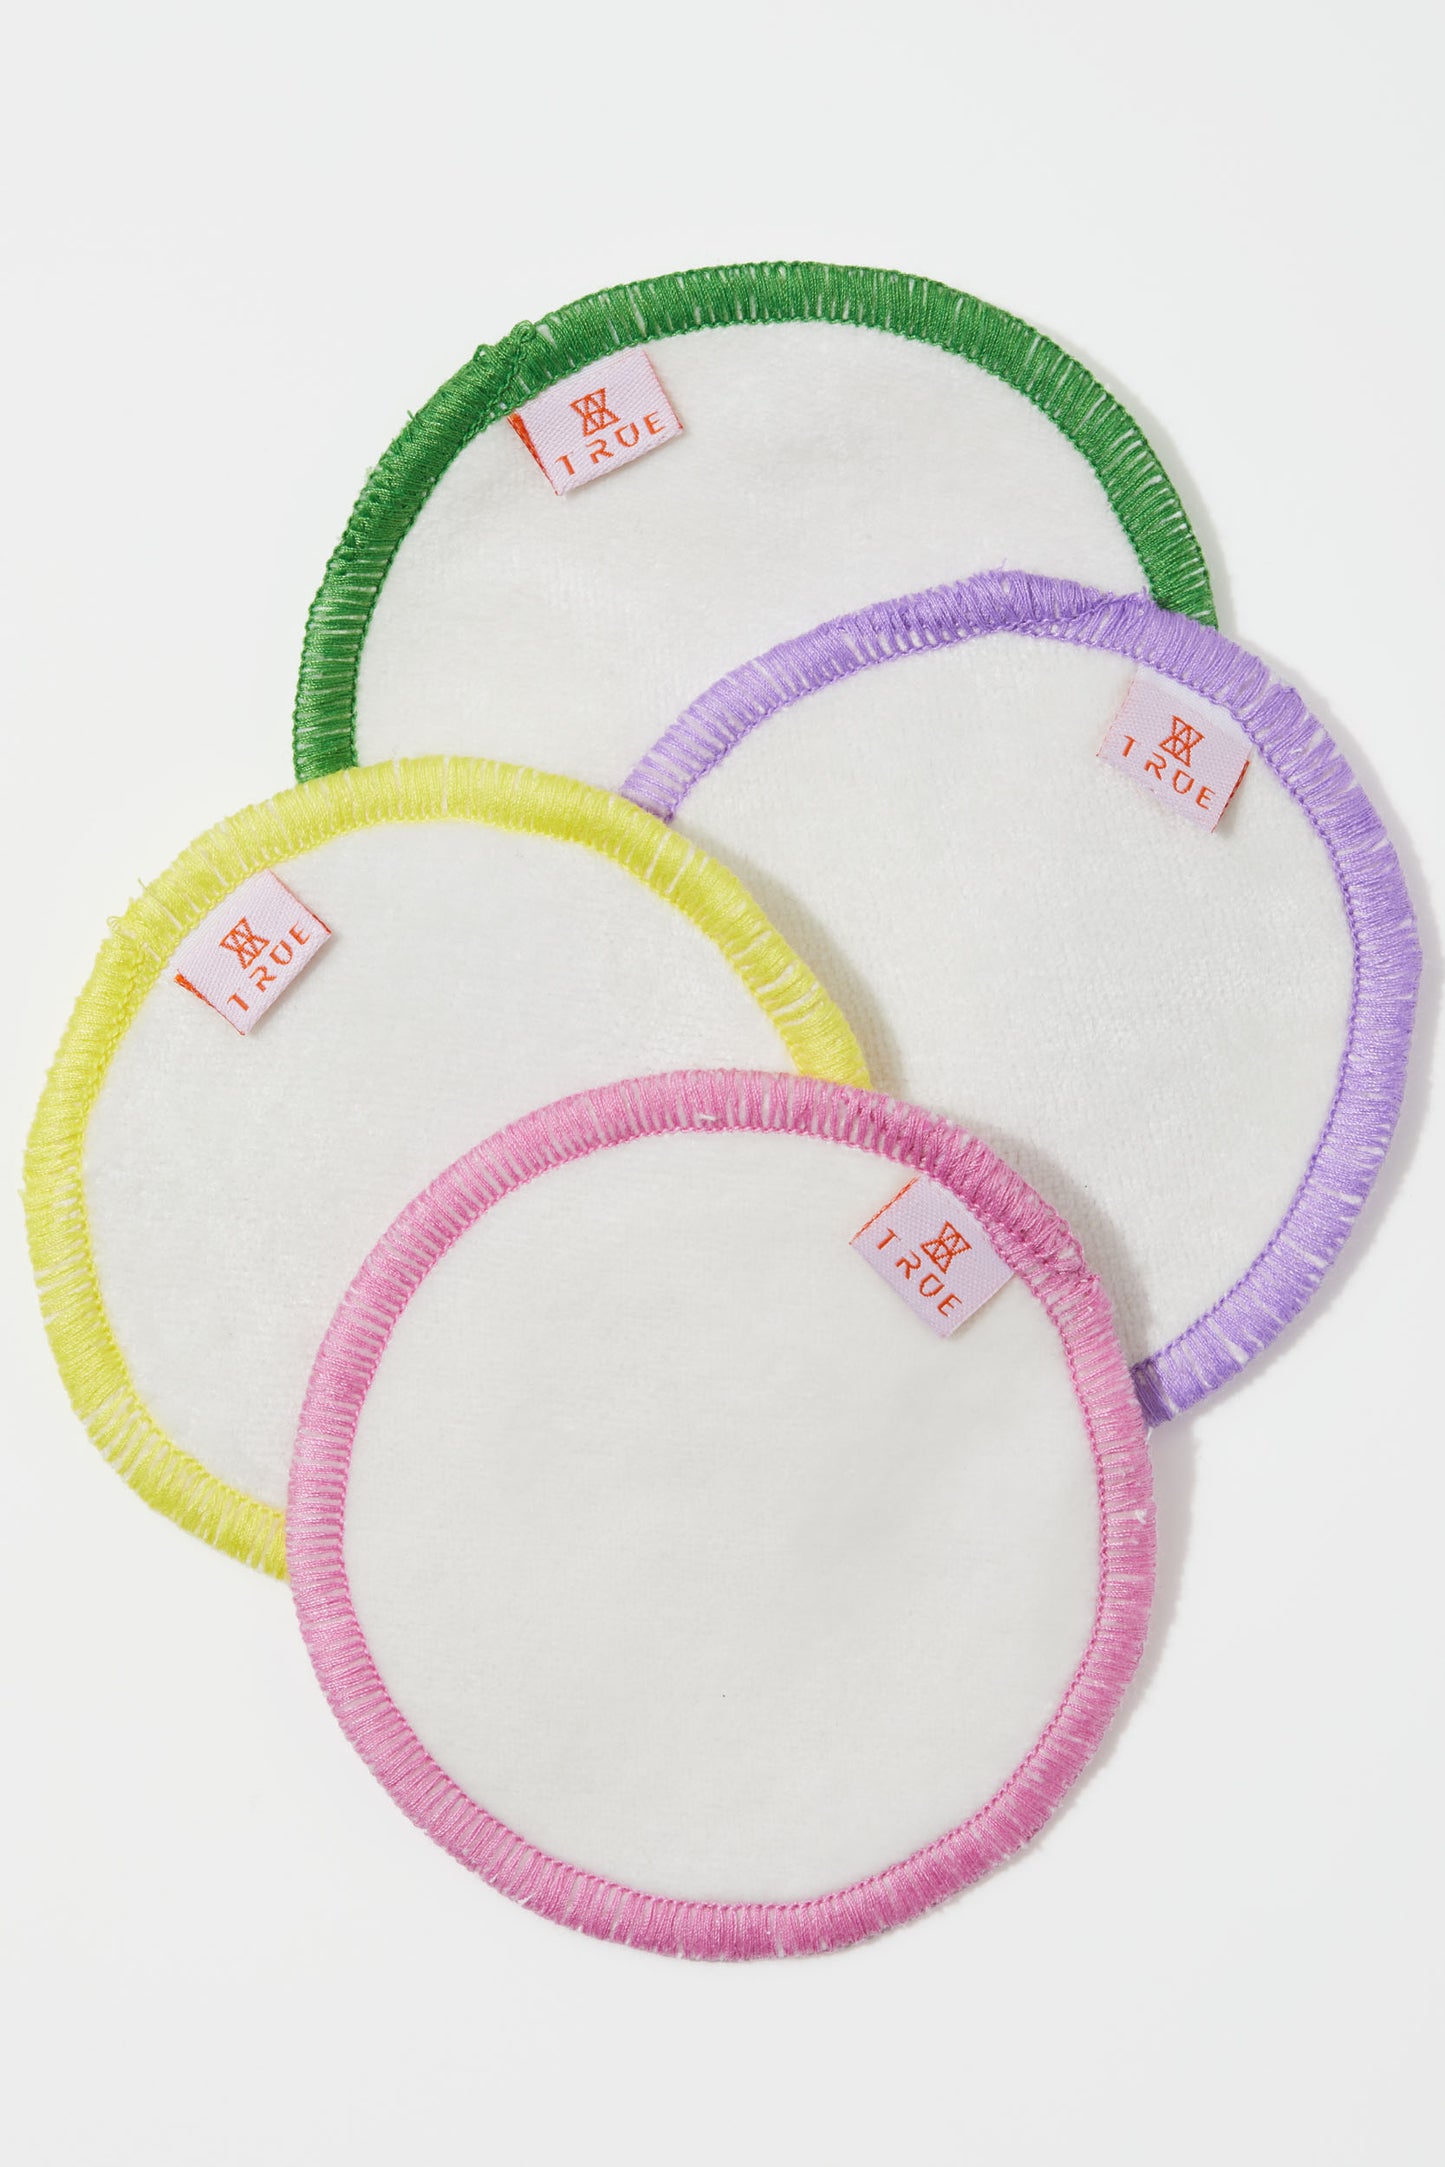 Certified Organic Reusable Cotton Pads, Pack of 8